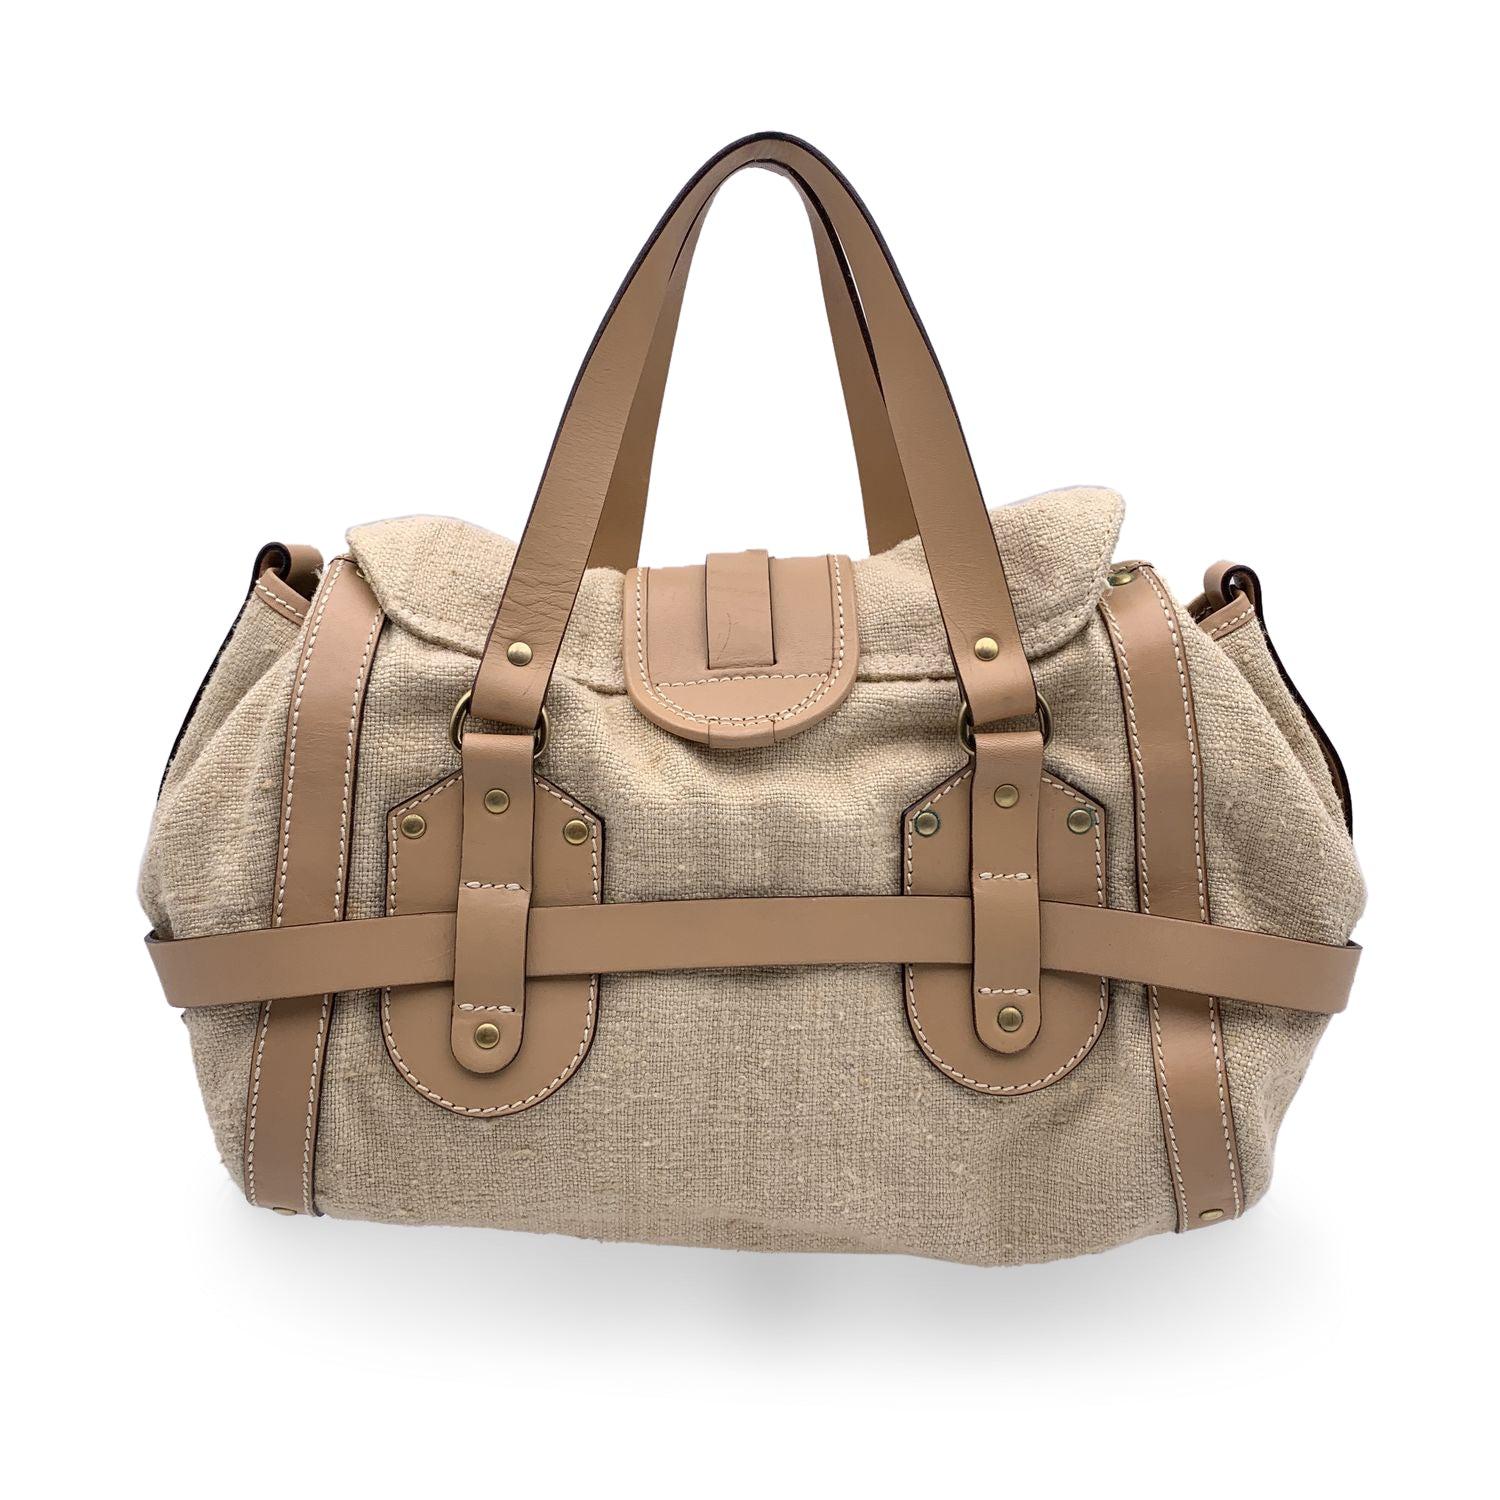 Chloe Beige Canvas and Leather Kerala Bag Satchel Handbag In Excellent Condition In Rome, Rome